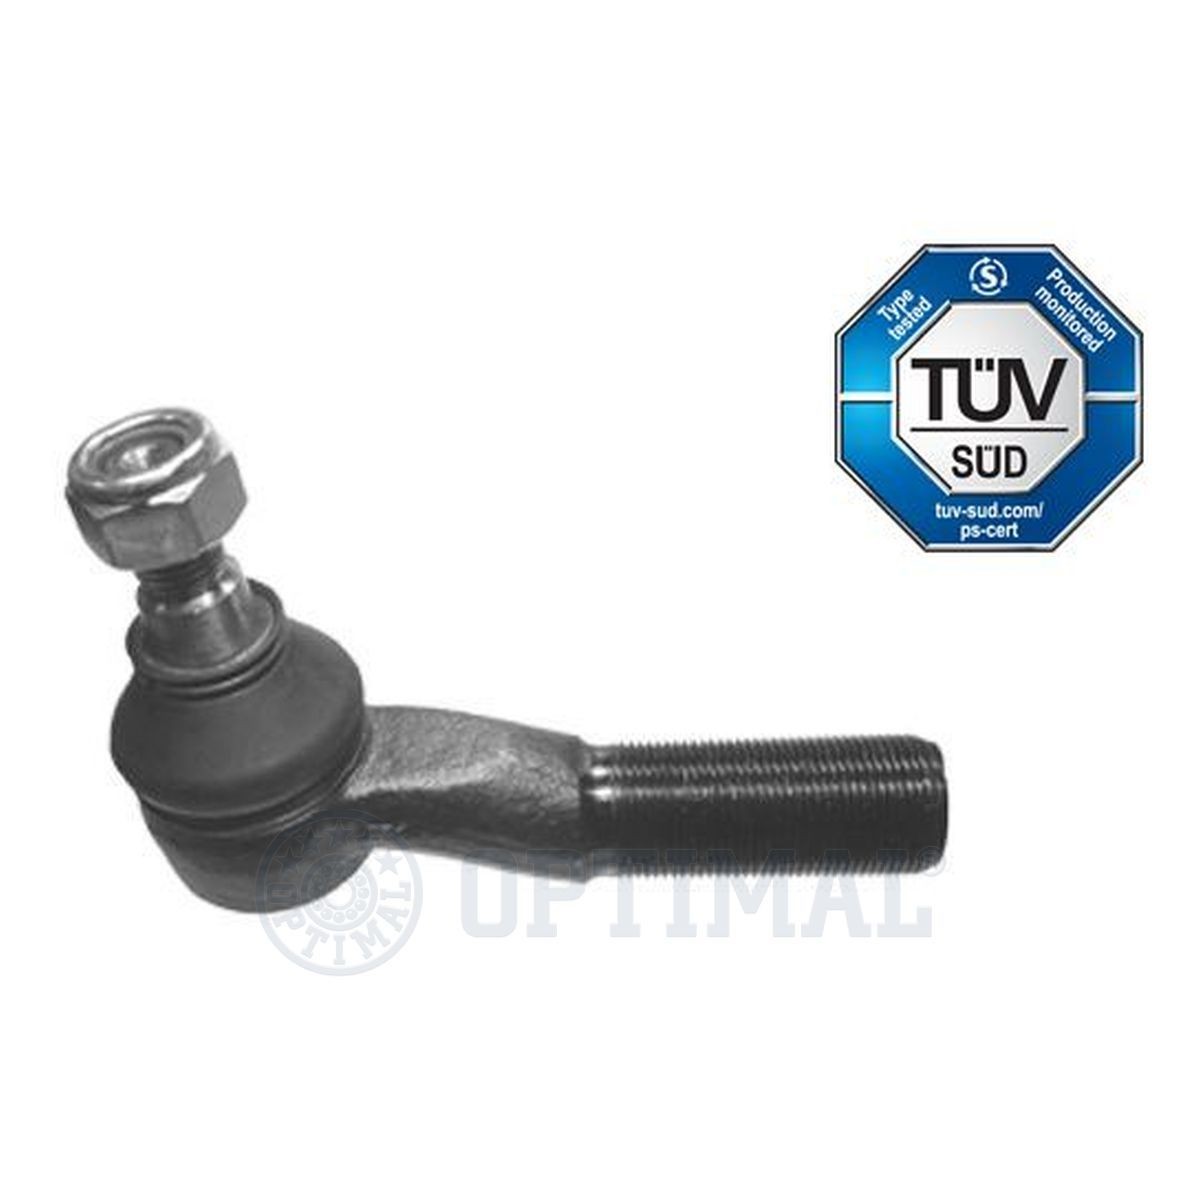 OPTIMAL G1-721 Track rod end Cone Size 16,2 mm, M24 x 1,50 RHT M mm, Front Axle Left, with self-locking nut